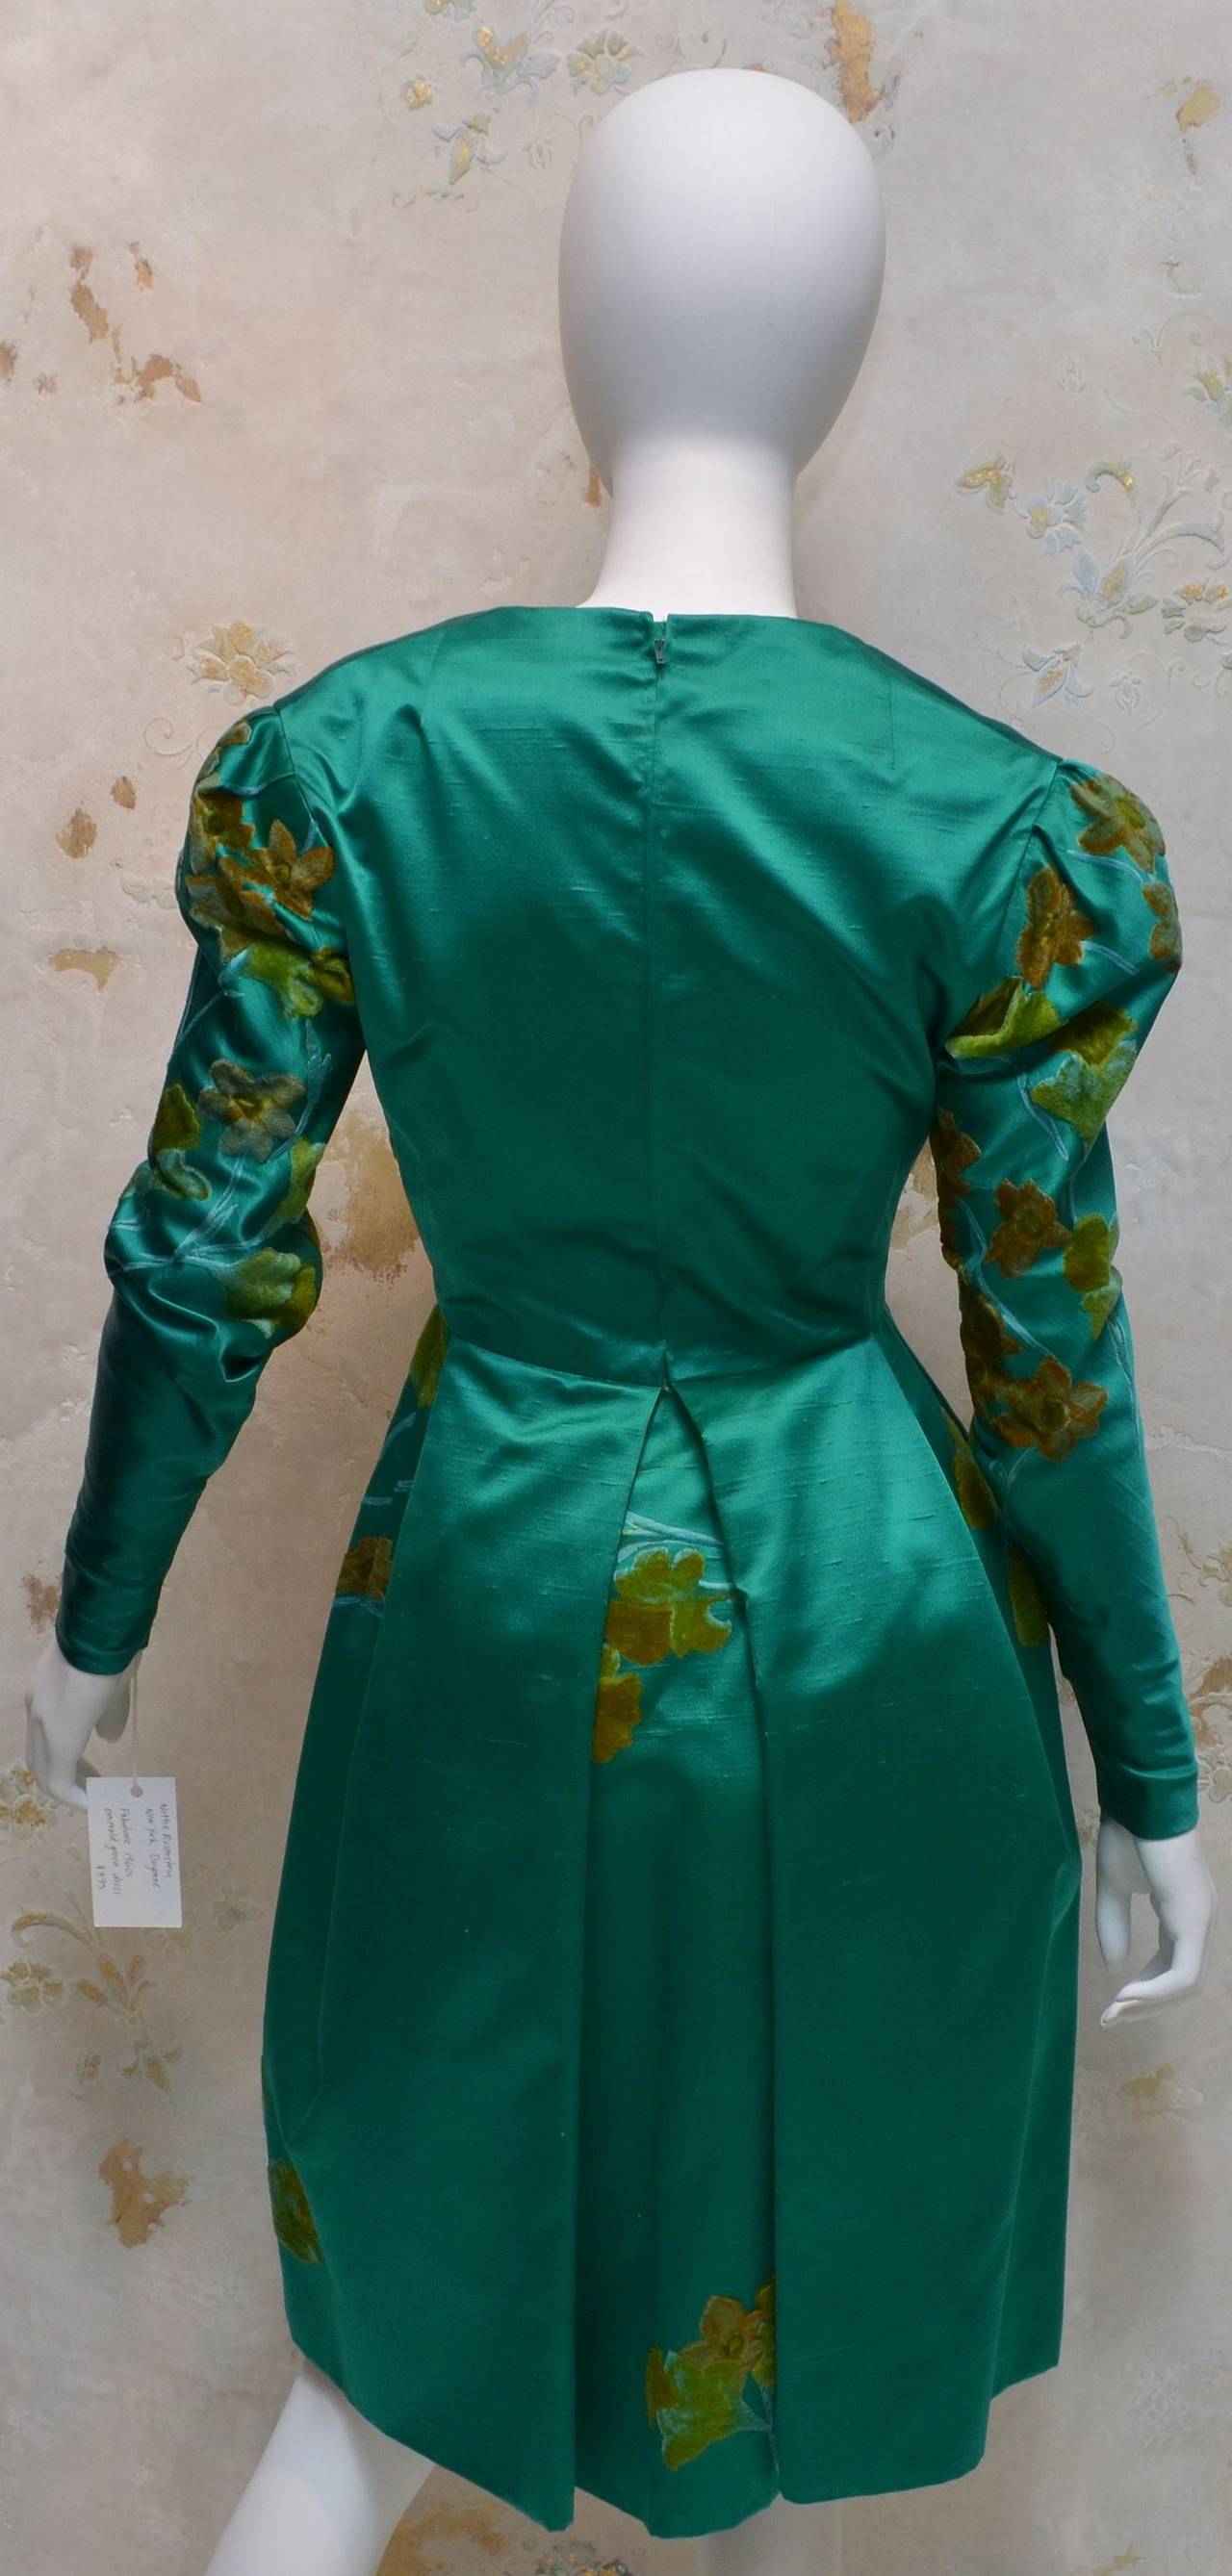 Vintage Nettie Rosenstein dress in emerald green silk satin features a back zipper closure, silk velvet floral detailing, fully lined, and with zippers at the cuffs as well. Note waist seam does not break pattern and flower is cut out and hand sewn